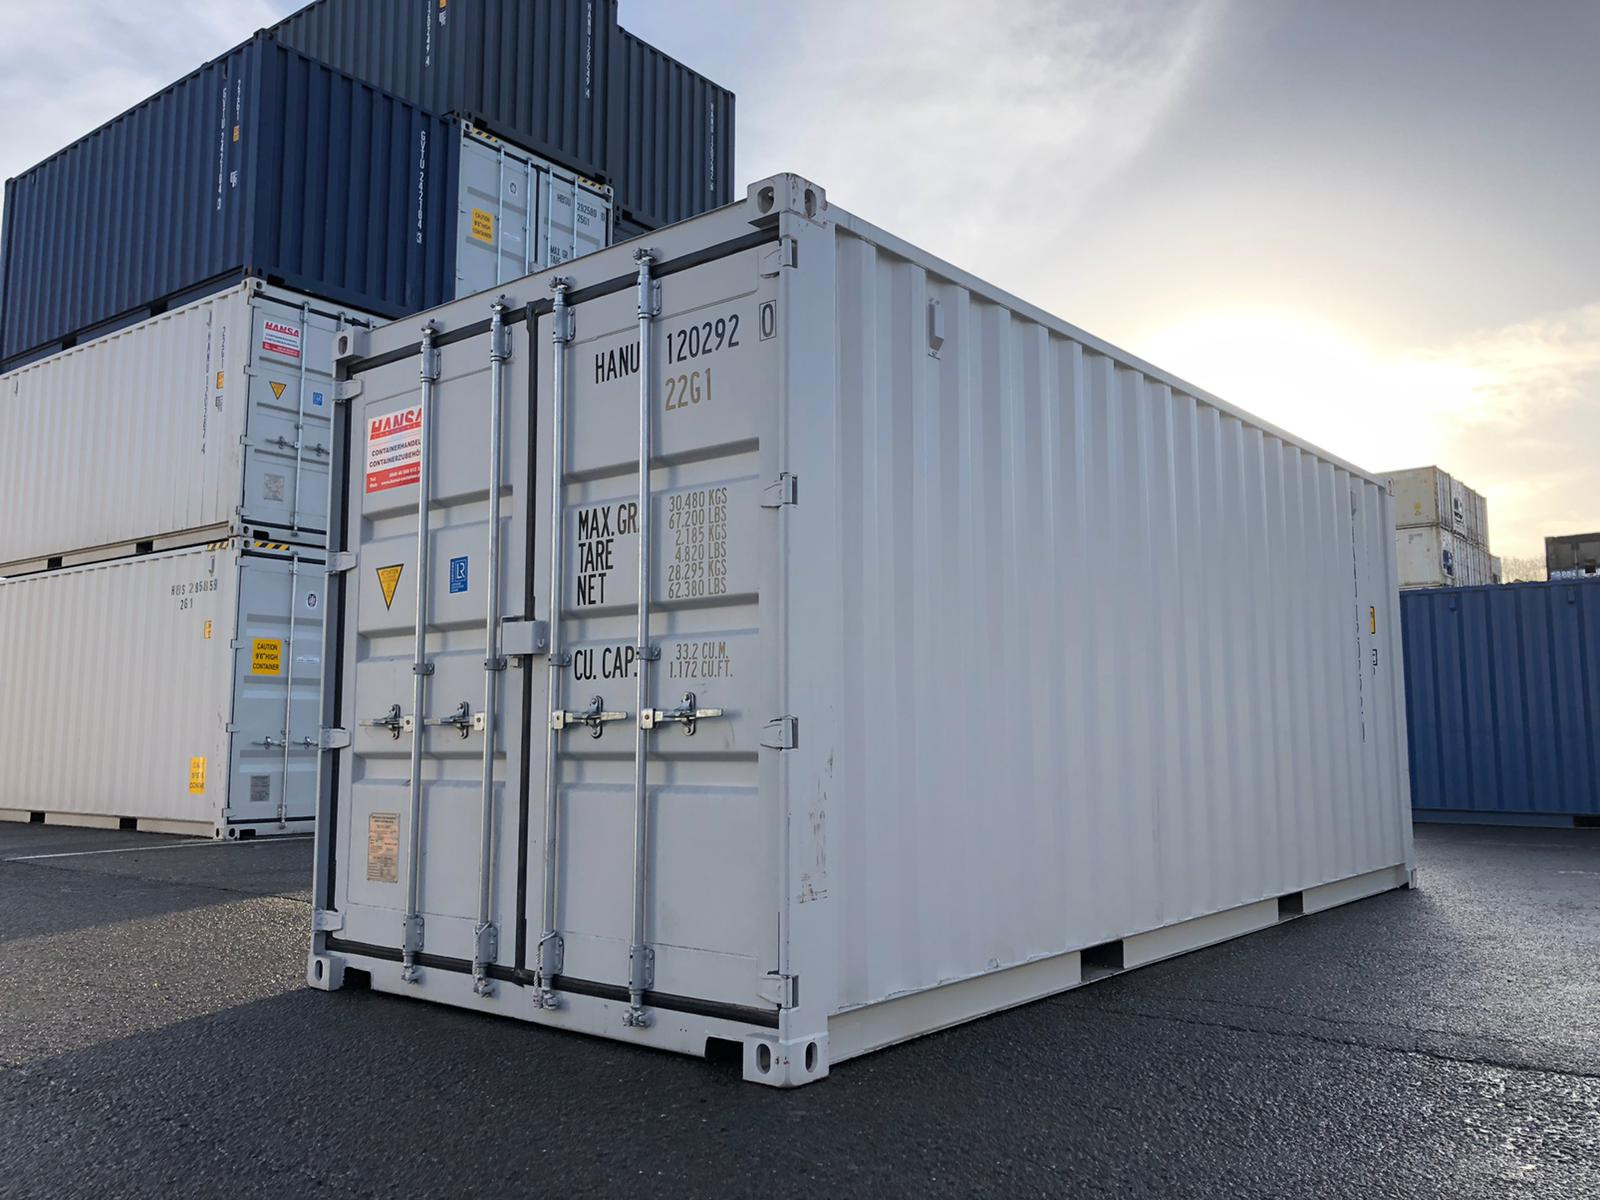 HCT Hansa Container Trading GmbH undefined: photos 6